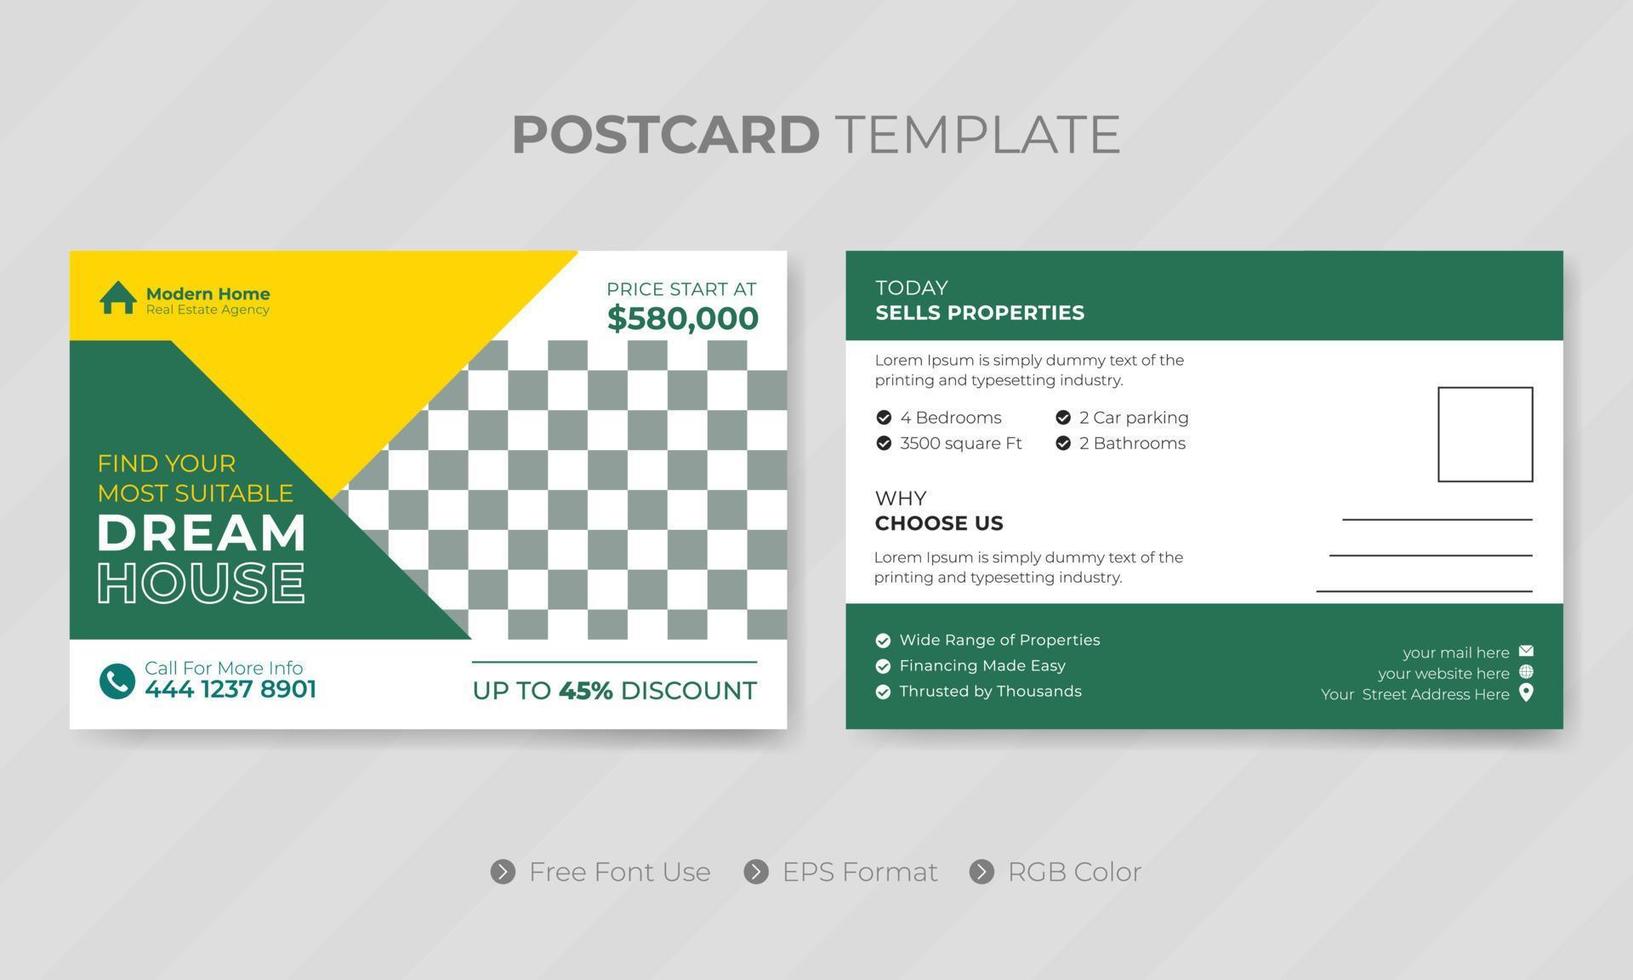 Professional digital company real estate postcard template or social media design for business agency pro download vector